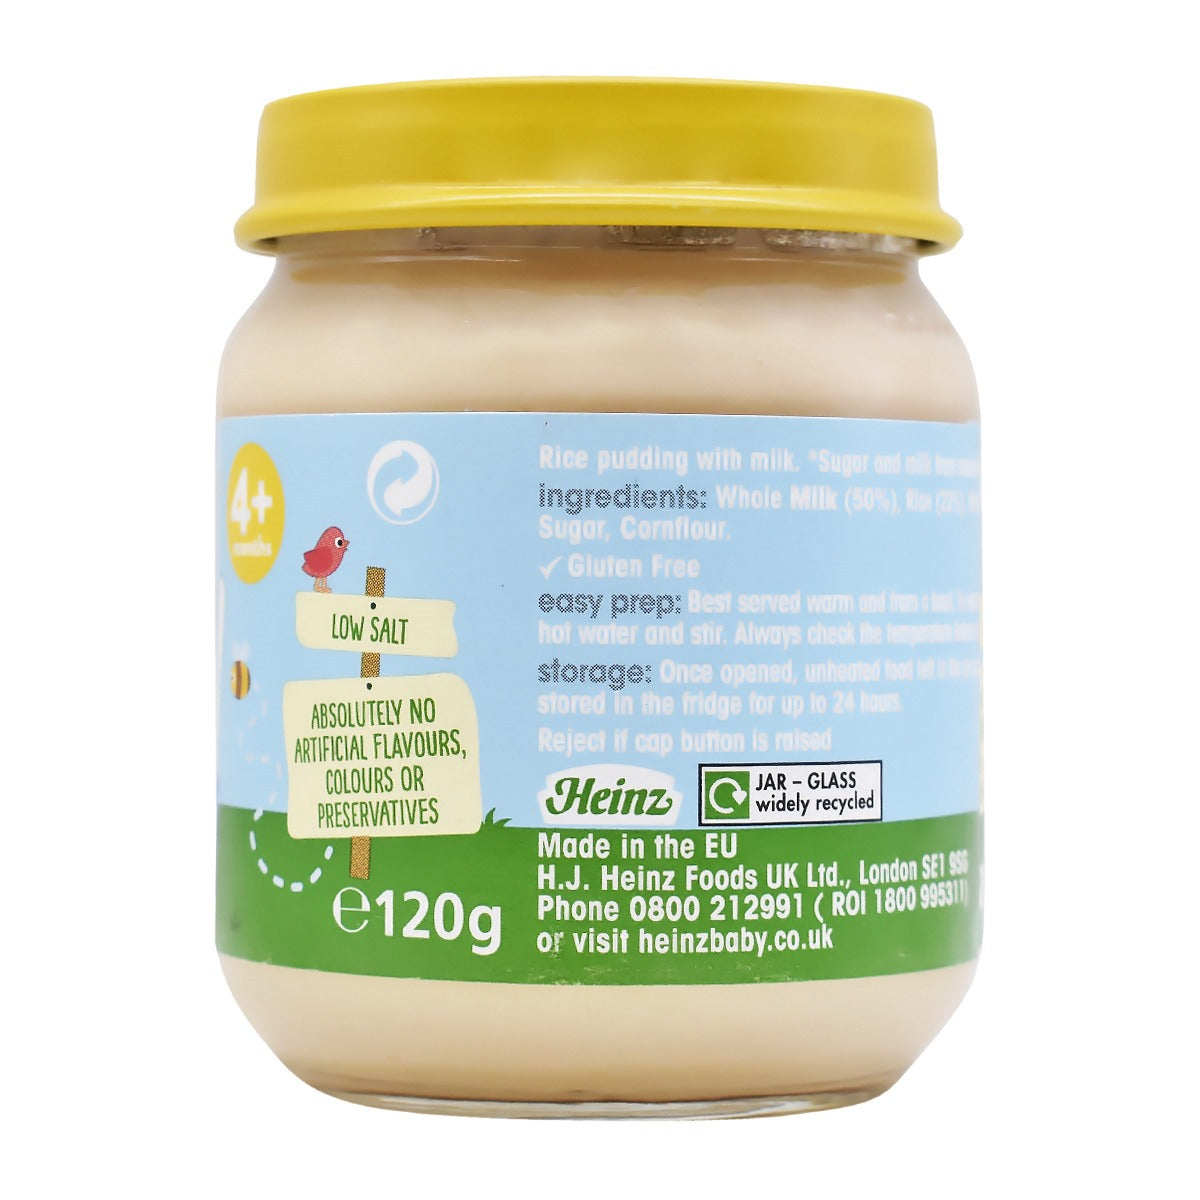 Heinz By Nature Rice Pudding - 120g